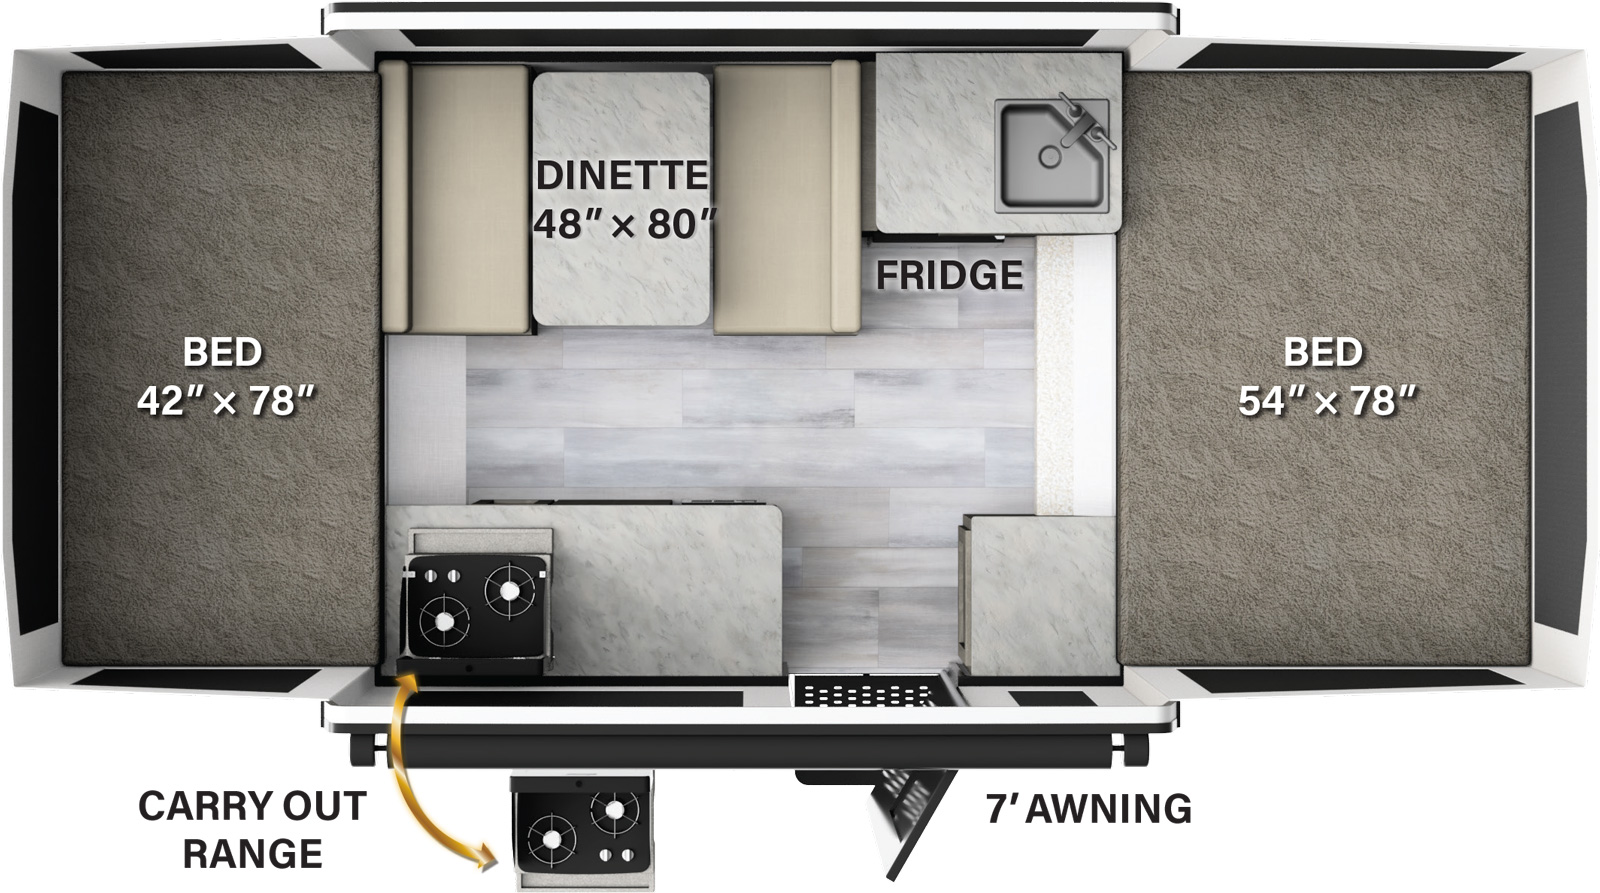 The 176LTD has no slide outs and one entry door. Exterior features include a 7 foot awning and a carry out range; Interior layout from front to back: tent bed; kitchen area with sink, refrigerator, dinette, two cabinets, and a door top stove; rear tent bed.